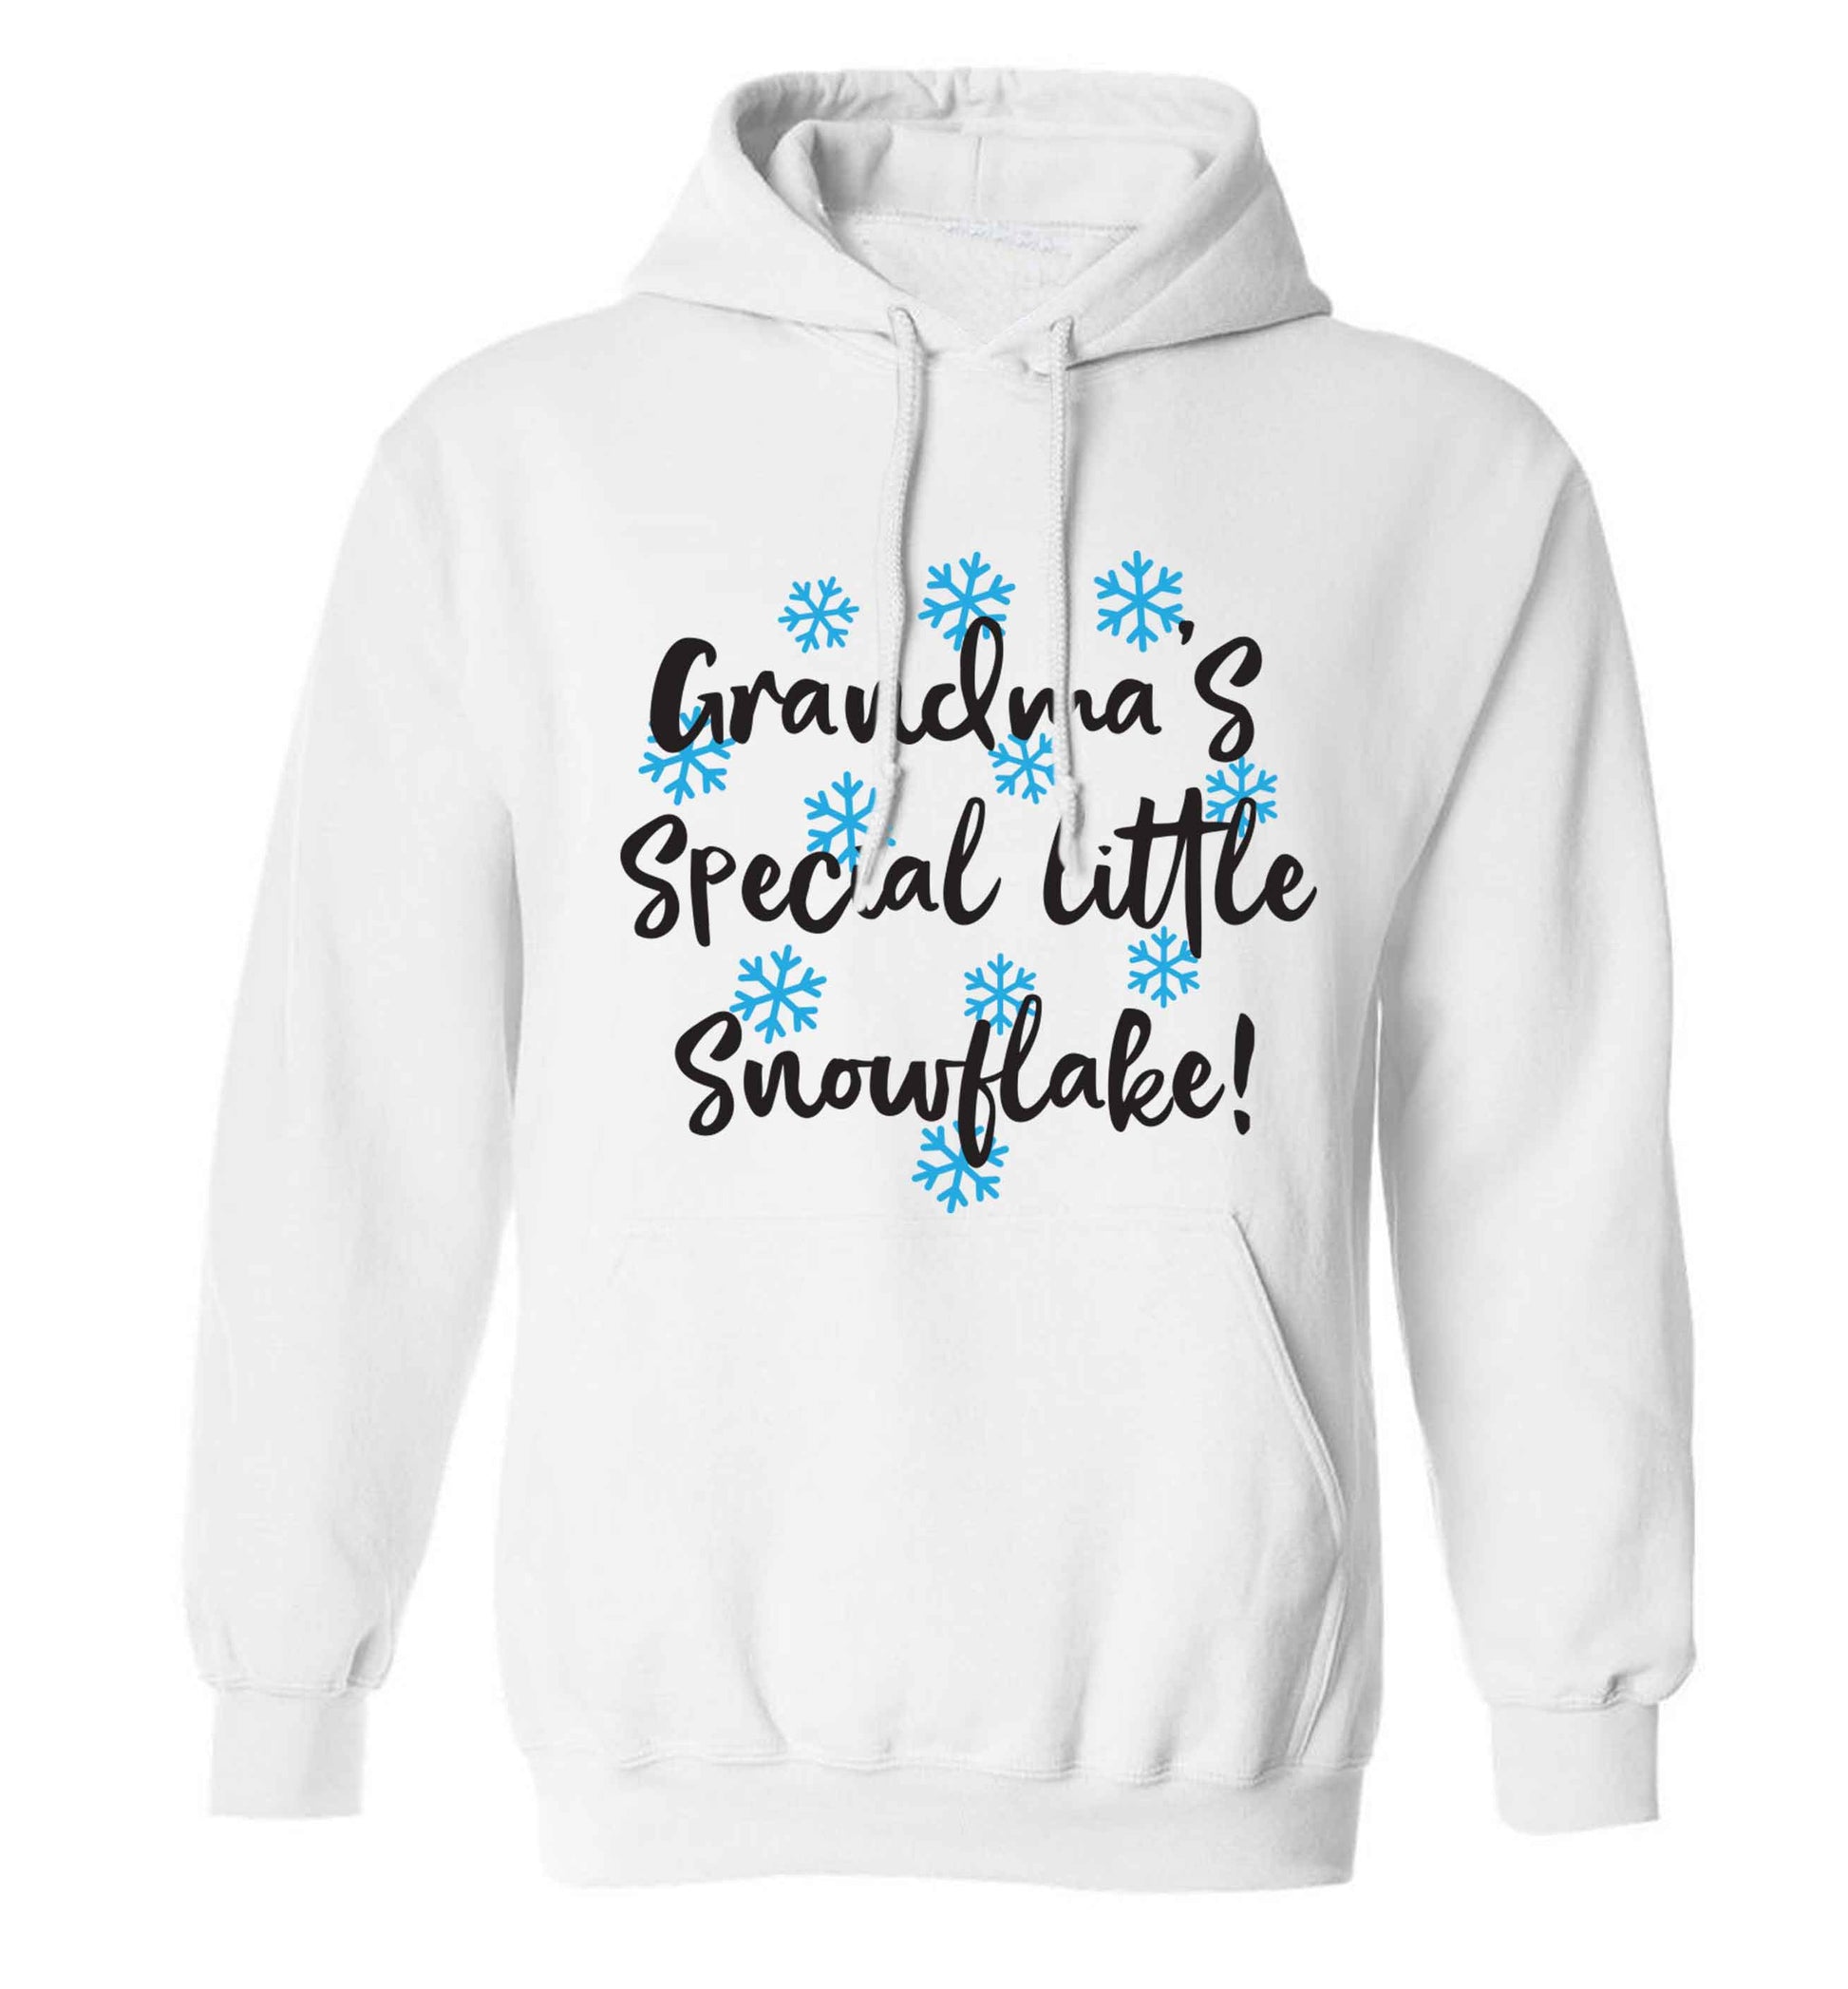 Grandma's special little snowflake adults unisex white hoodie 2XL